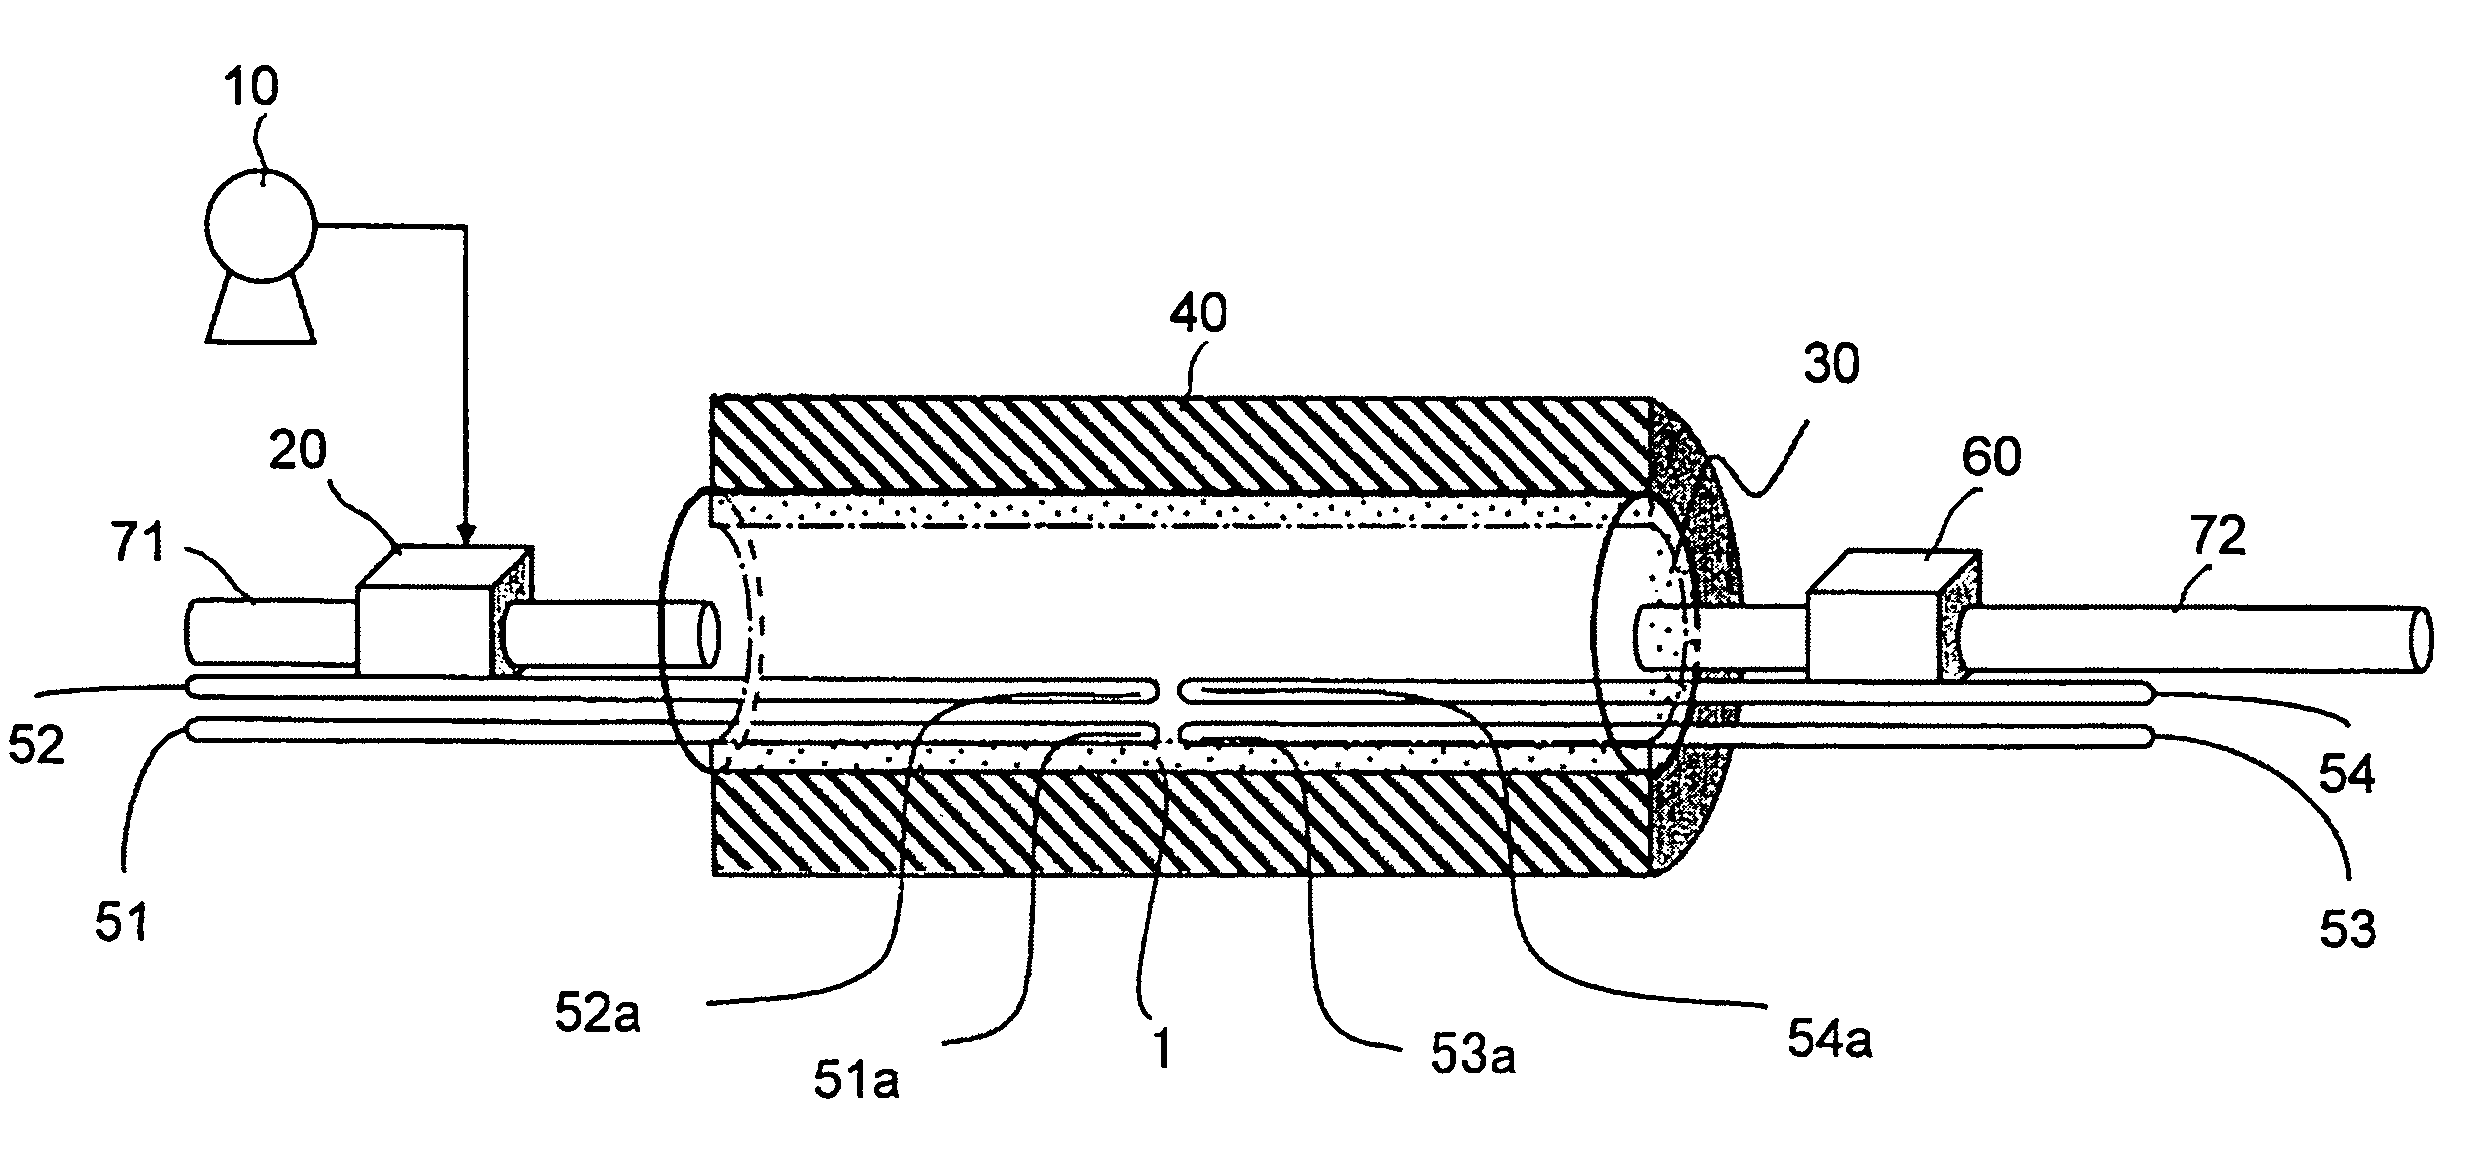 Fluid reforming apparatus for maintaining thermal conductivity of a fluid in a flow channel